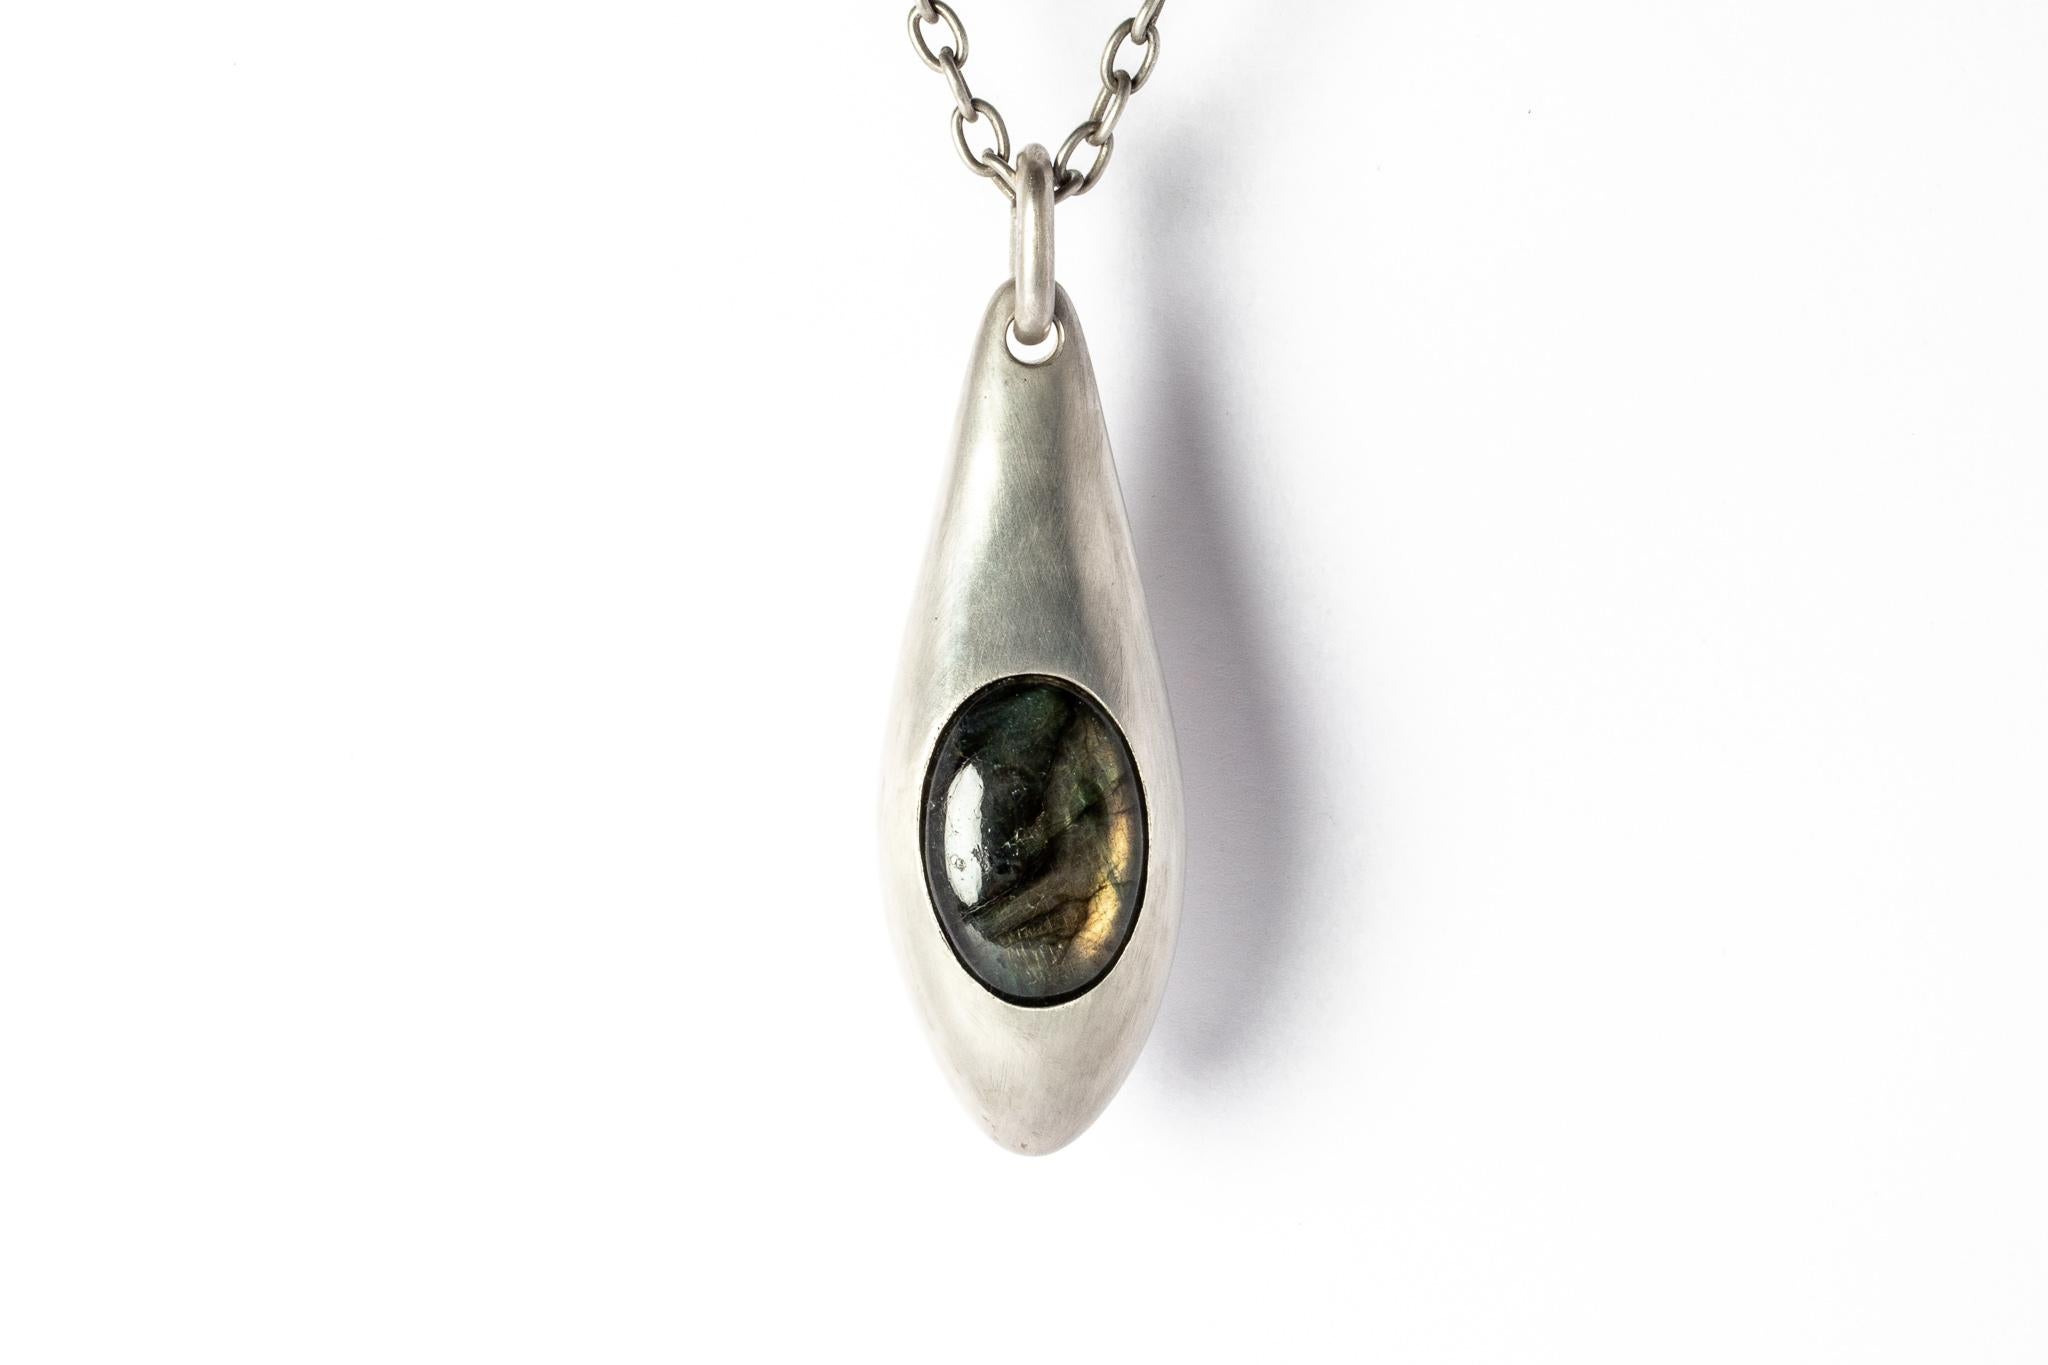 Necklace in dipped acid sterling and a rough of labradorite. It comes on 74 cm sterling silver chain.